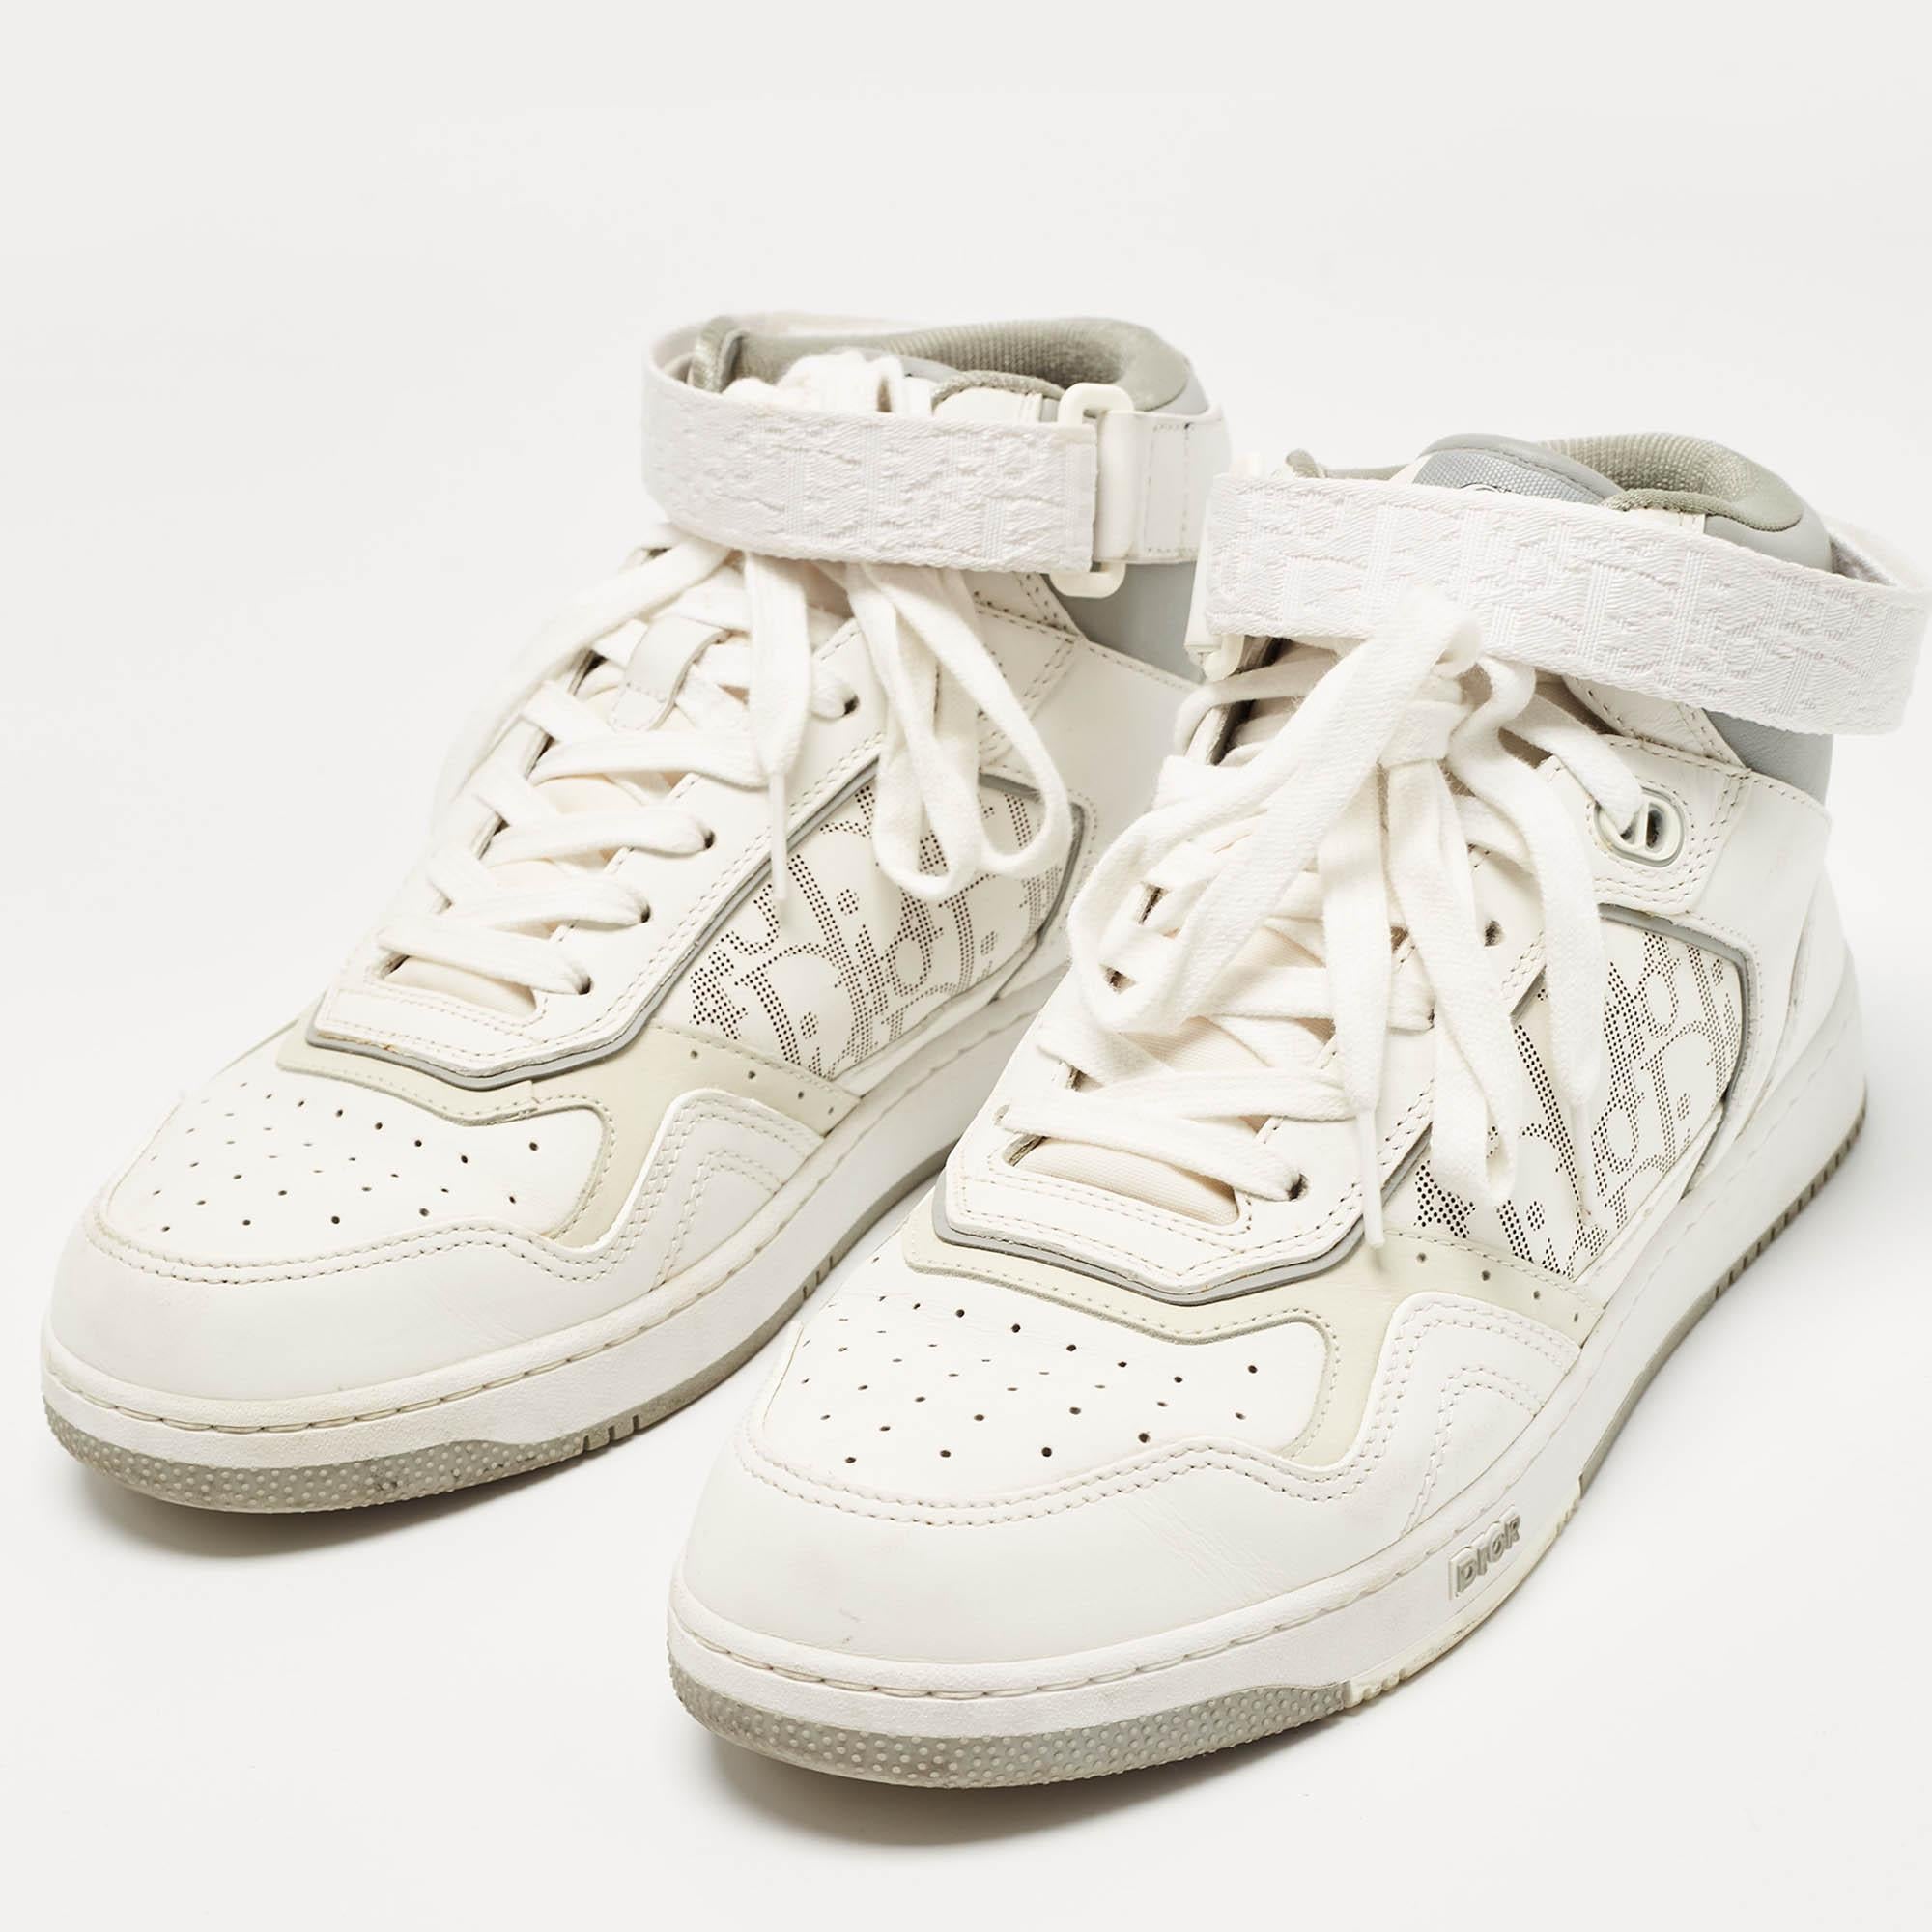 Dior White/Grey Leather B27 High Top Sneakers Size 42 For Sale 3